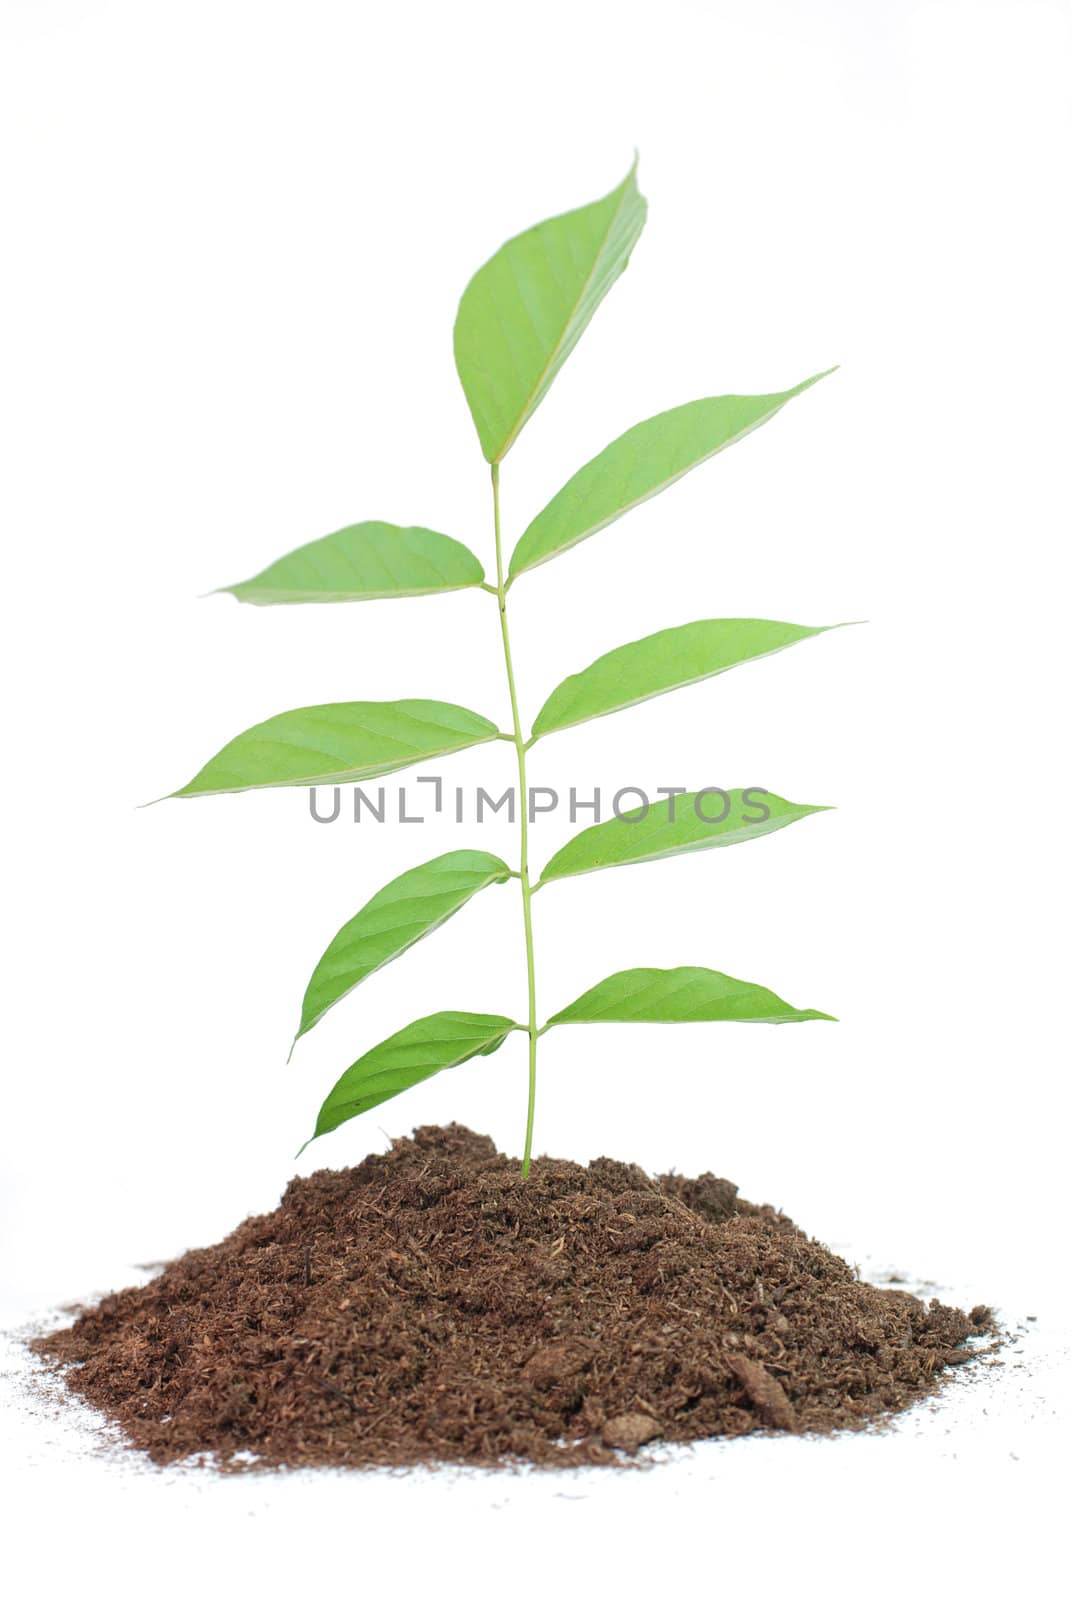 Seedling in soil  isolated on white background.